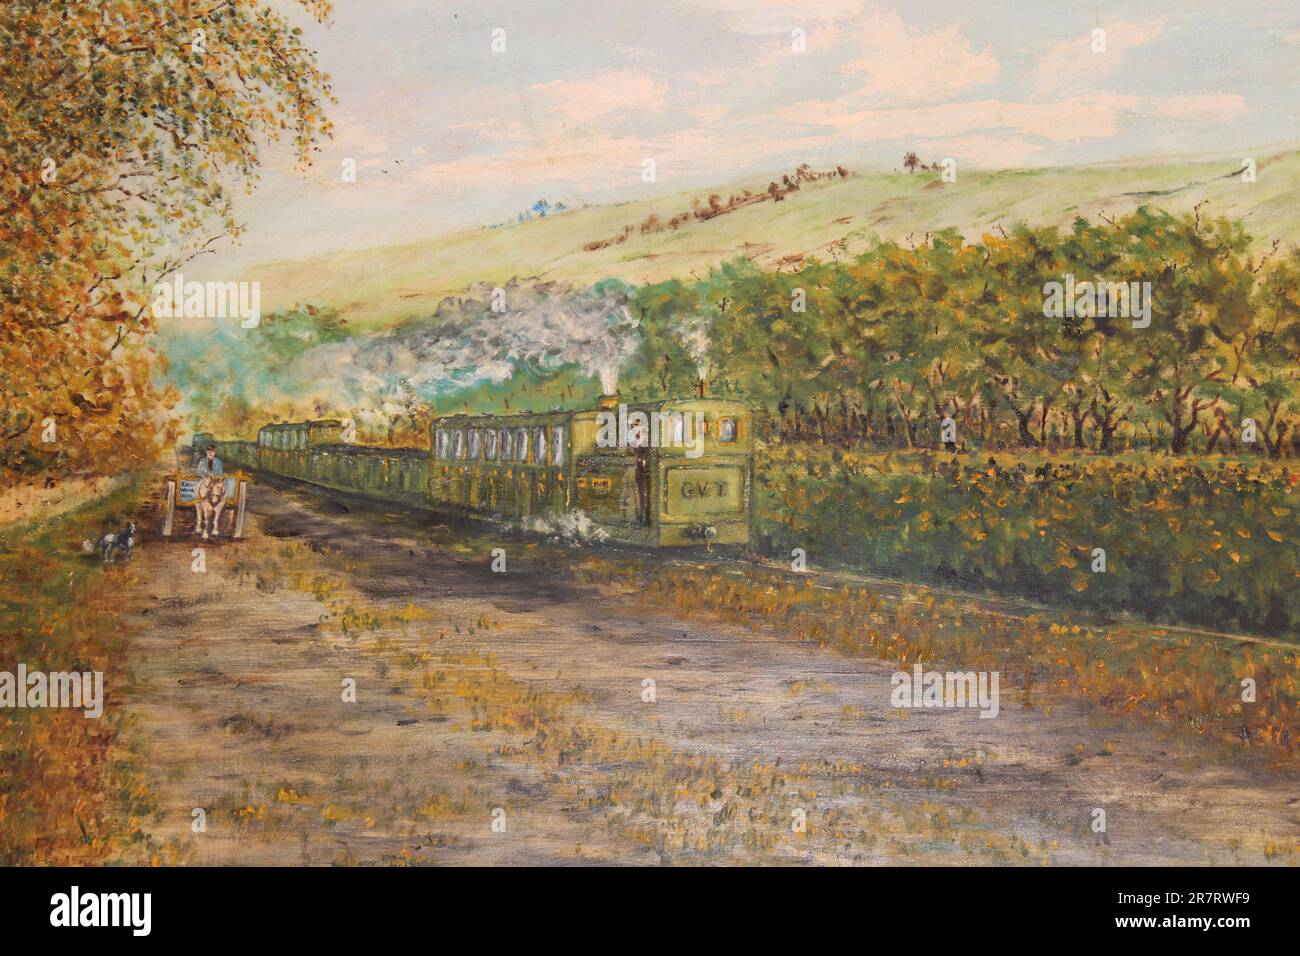 Painting of the former Glyn Valley Tramway Running from Chirk to Glyn Ceiriog Stock Photo